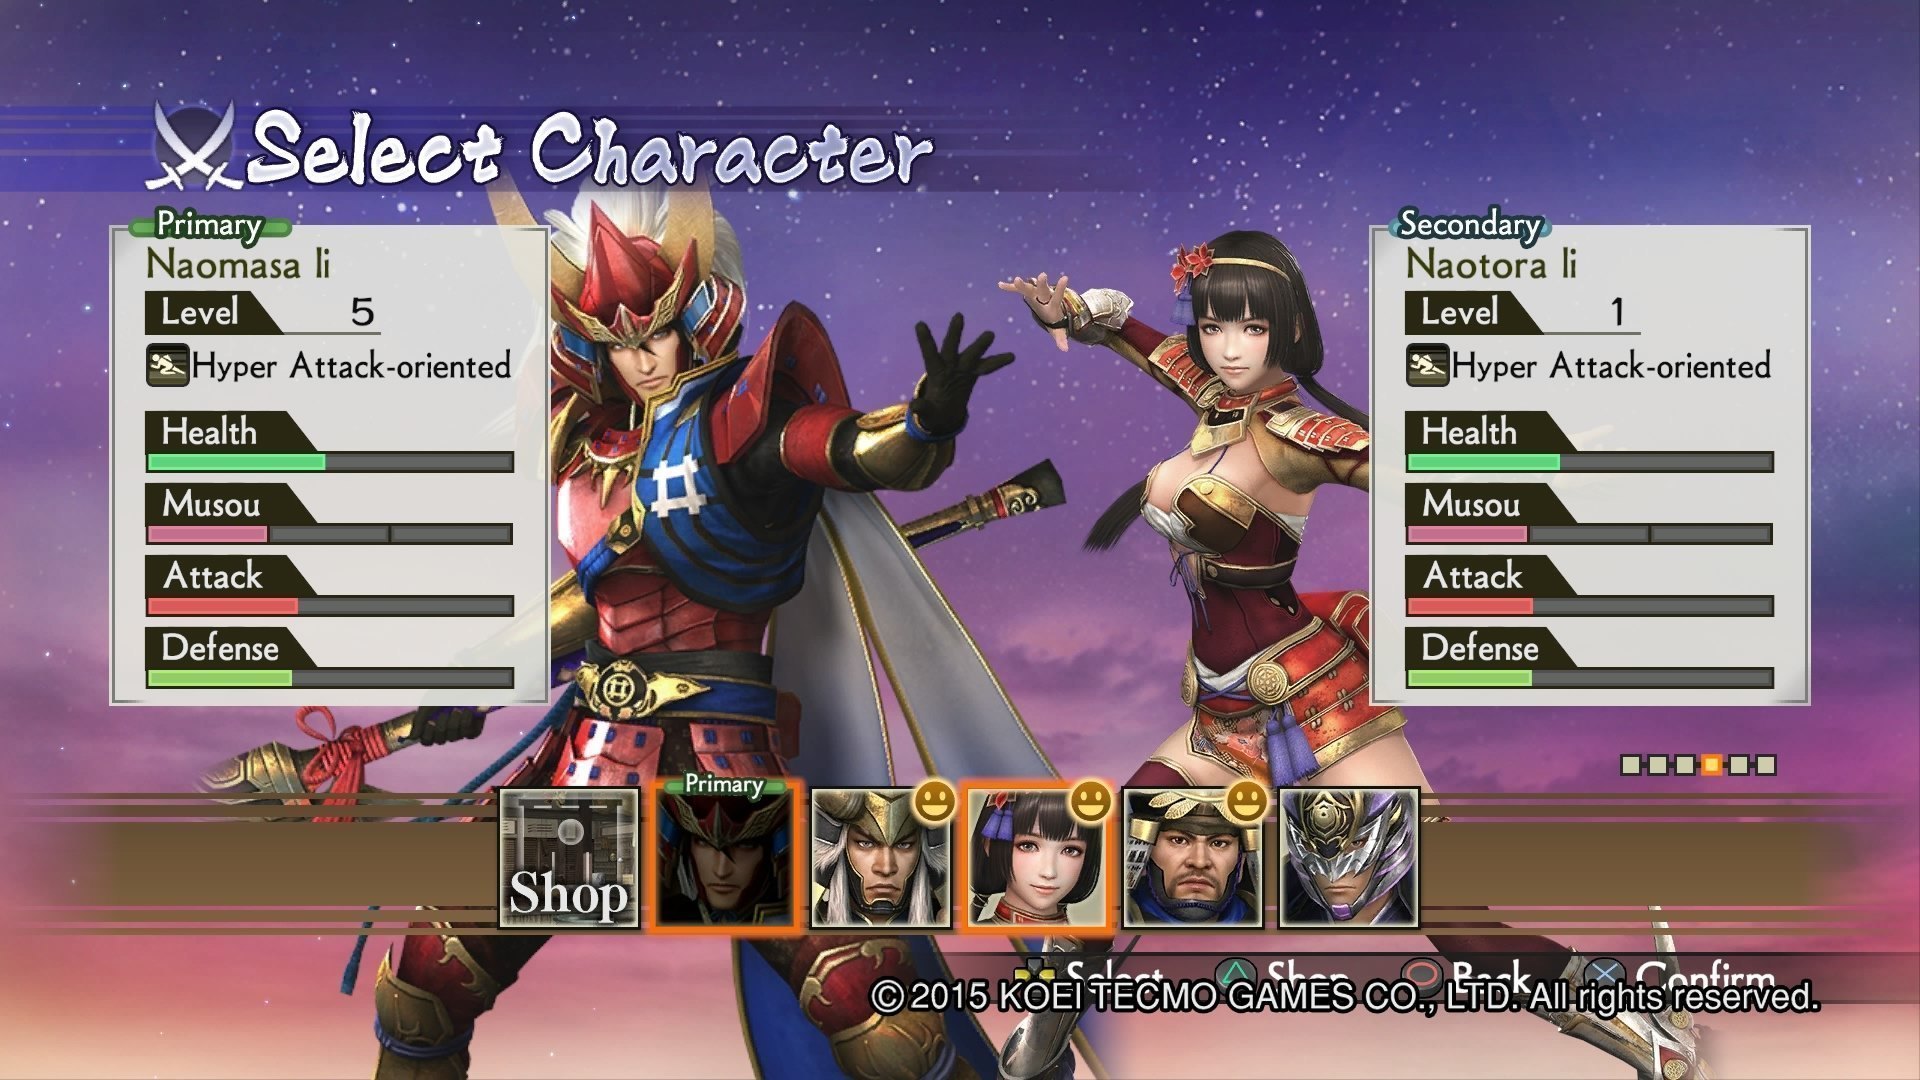 Samurai Warriors 4-II Review (PlayStation 4) - Official GBAtemp Review |  GBAtemp.net - The Independent Video Game Community